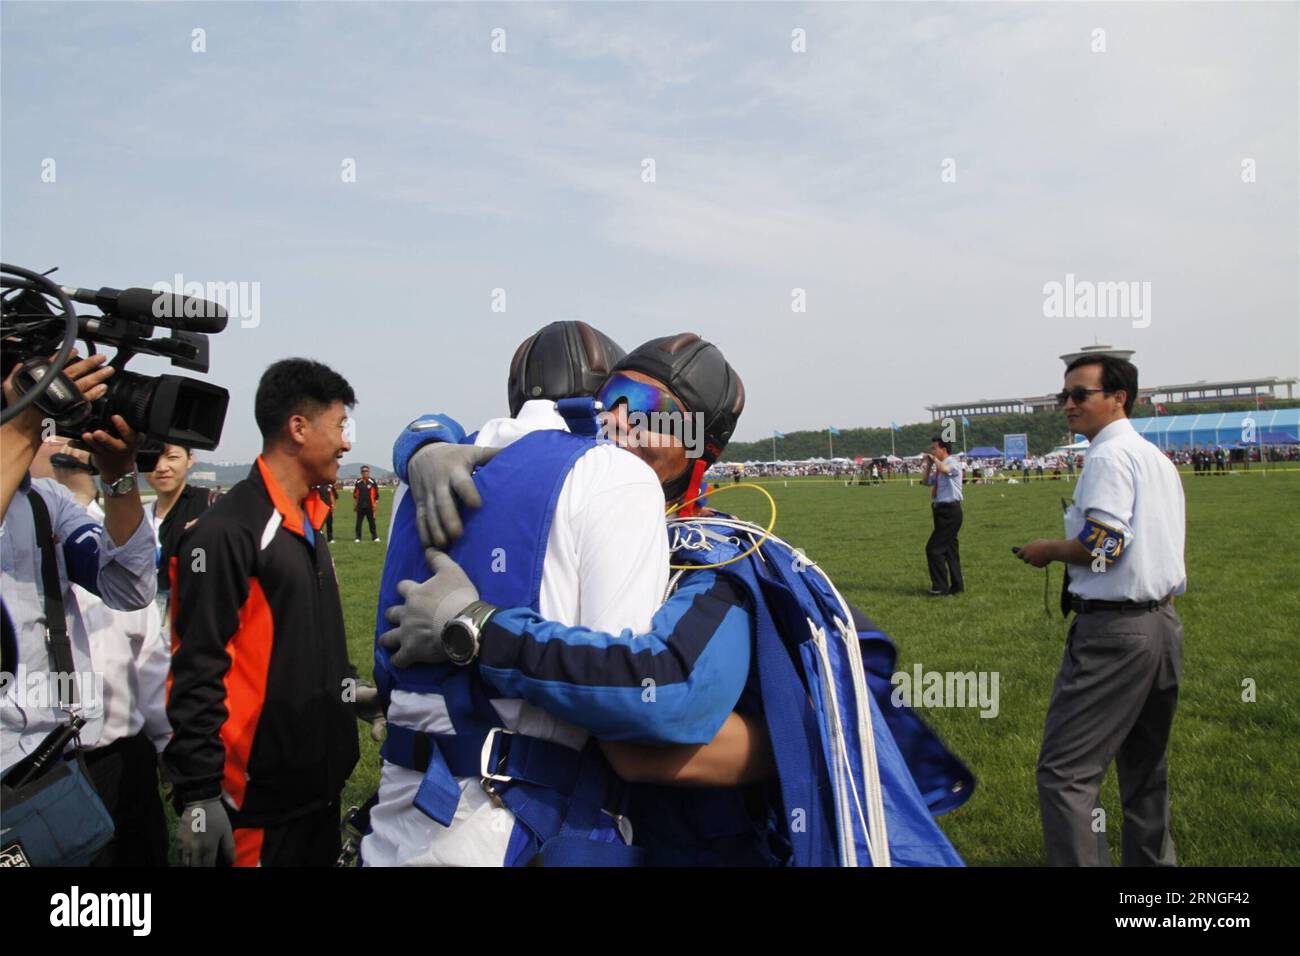 (160925) -- PYONGYANG, Sept. 25, 2016 -- A foreign visitor hugs a local parachutist coach after their landing during an international air show in Wonsan, the Democratic People s Republic of Korea (DPRK), on Sept. 25, 2016, the second day of the international air show. The Wonsan International Friendship Air Festival, the first of its kind in the DPRK, runs from Saturday through Sunday at Kalma International Airport, which was redesigned and reconstructed from a military airfield to promote tourism. ) (cl) DPRK-WONSAN-INTERNATIONAL AIR SHOW ZhuxLongchuan PUBLICATIONxNOTxINxCHN   Pyongyang Sept Stock Photo